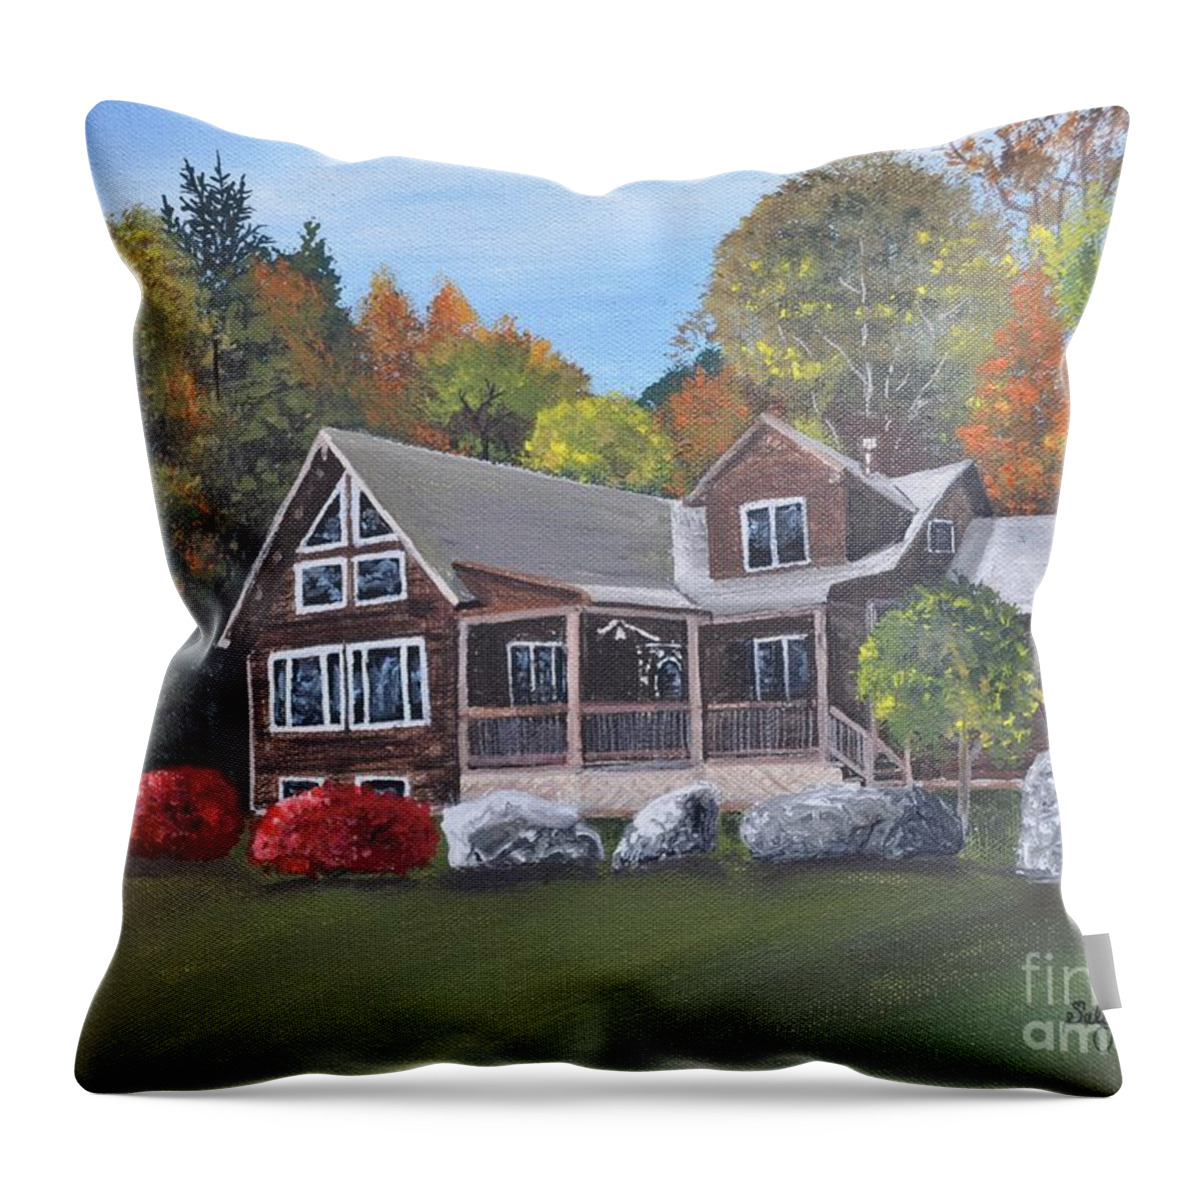  Lussier Home Throw Pillow featuring the painting Lussier Home Portrait by Sally Tiska Rice